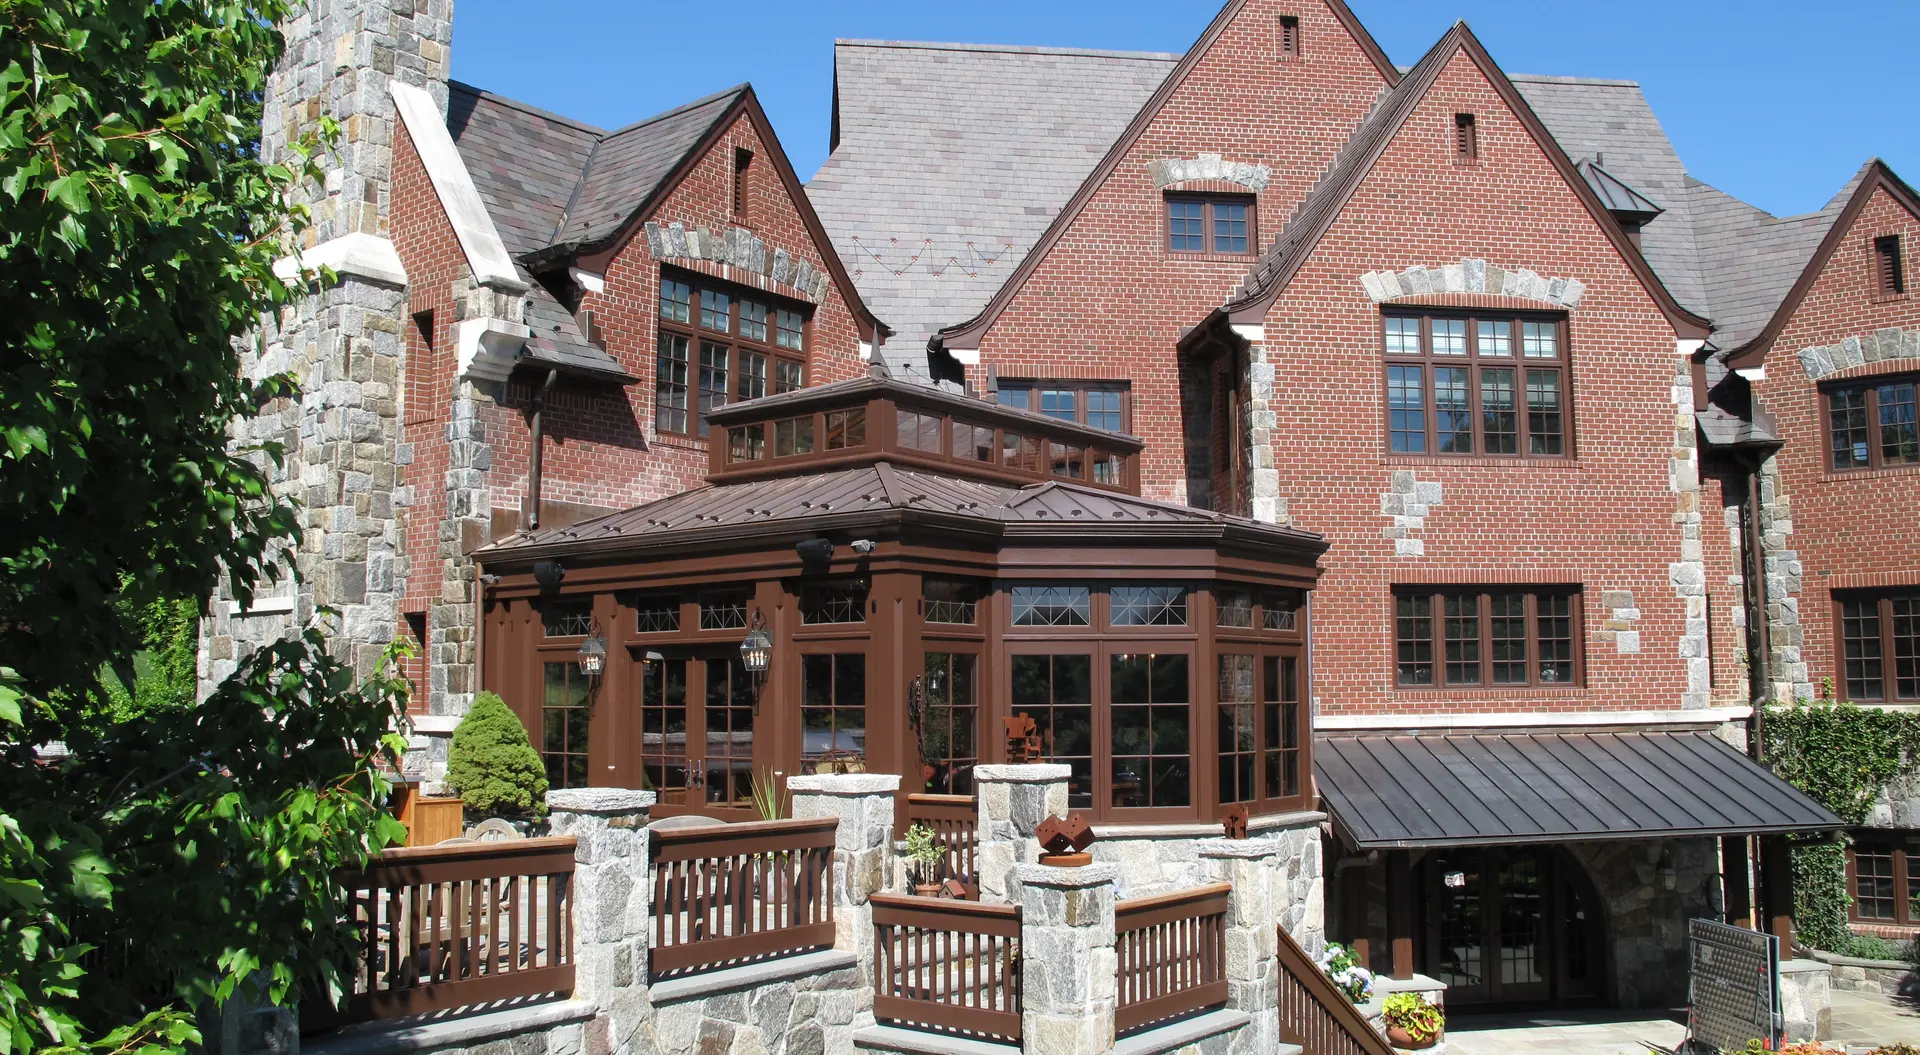 A large brick house with a balcony and patio.